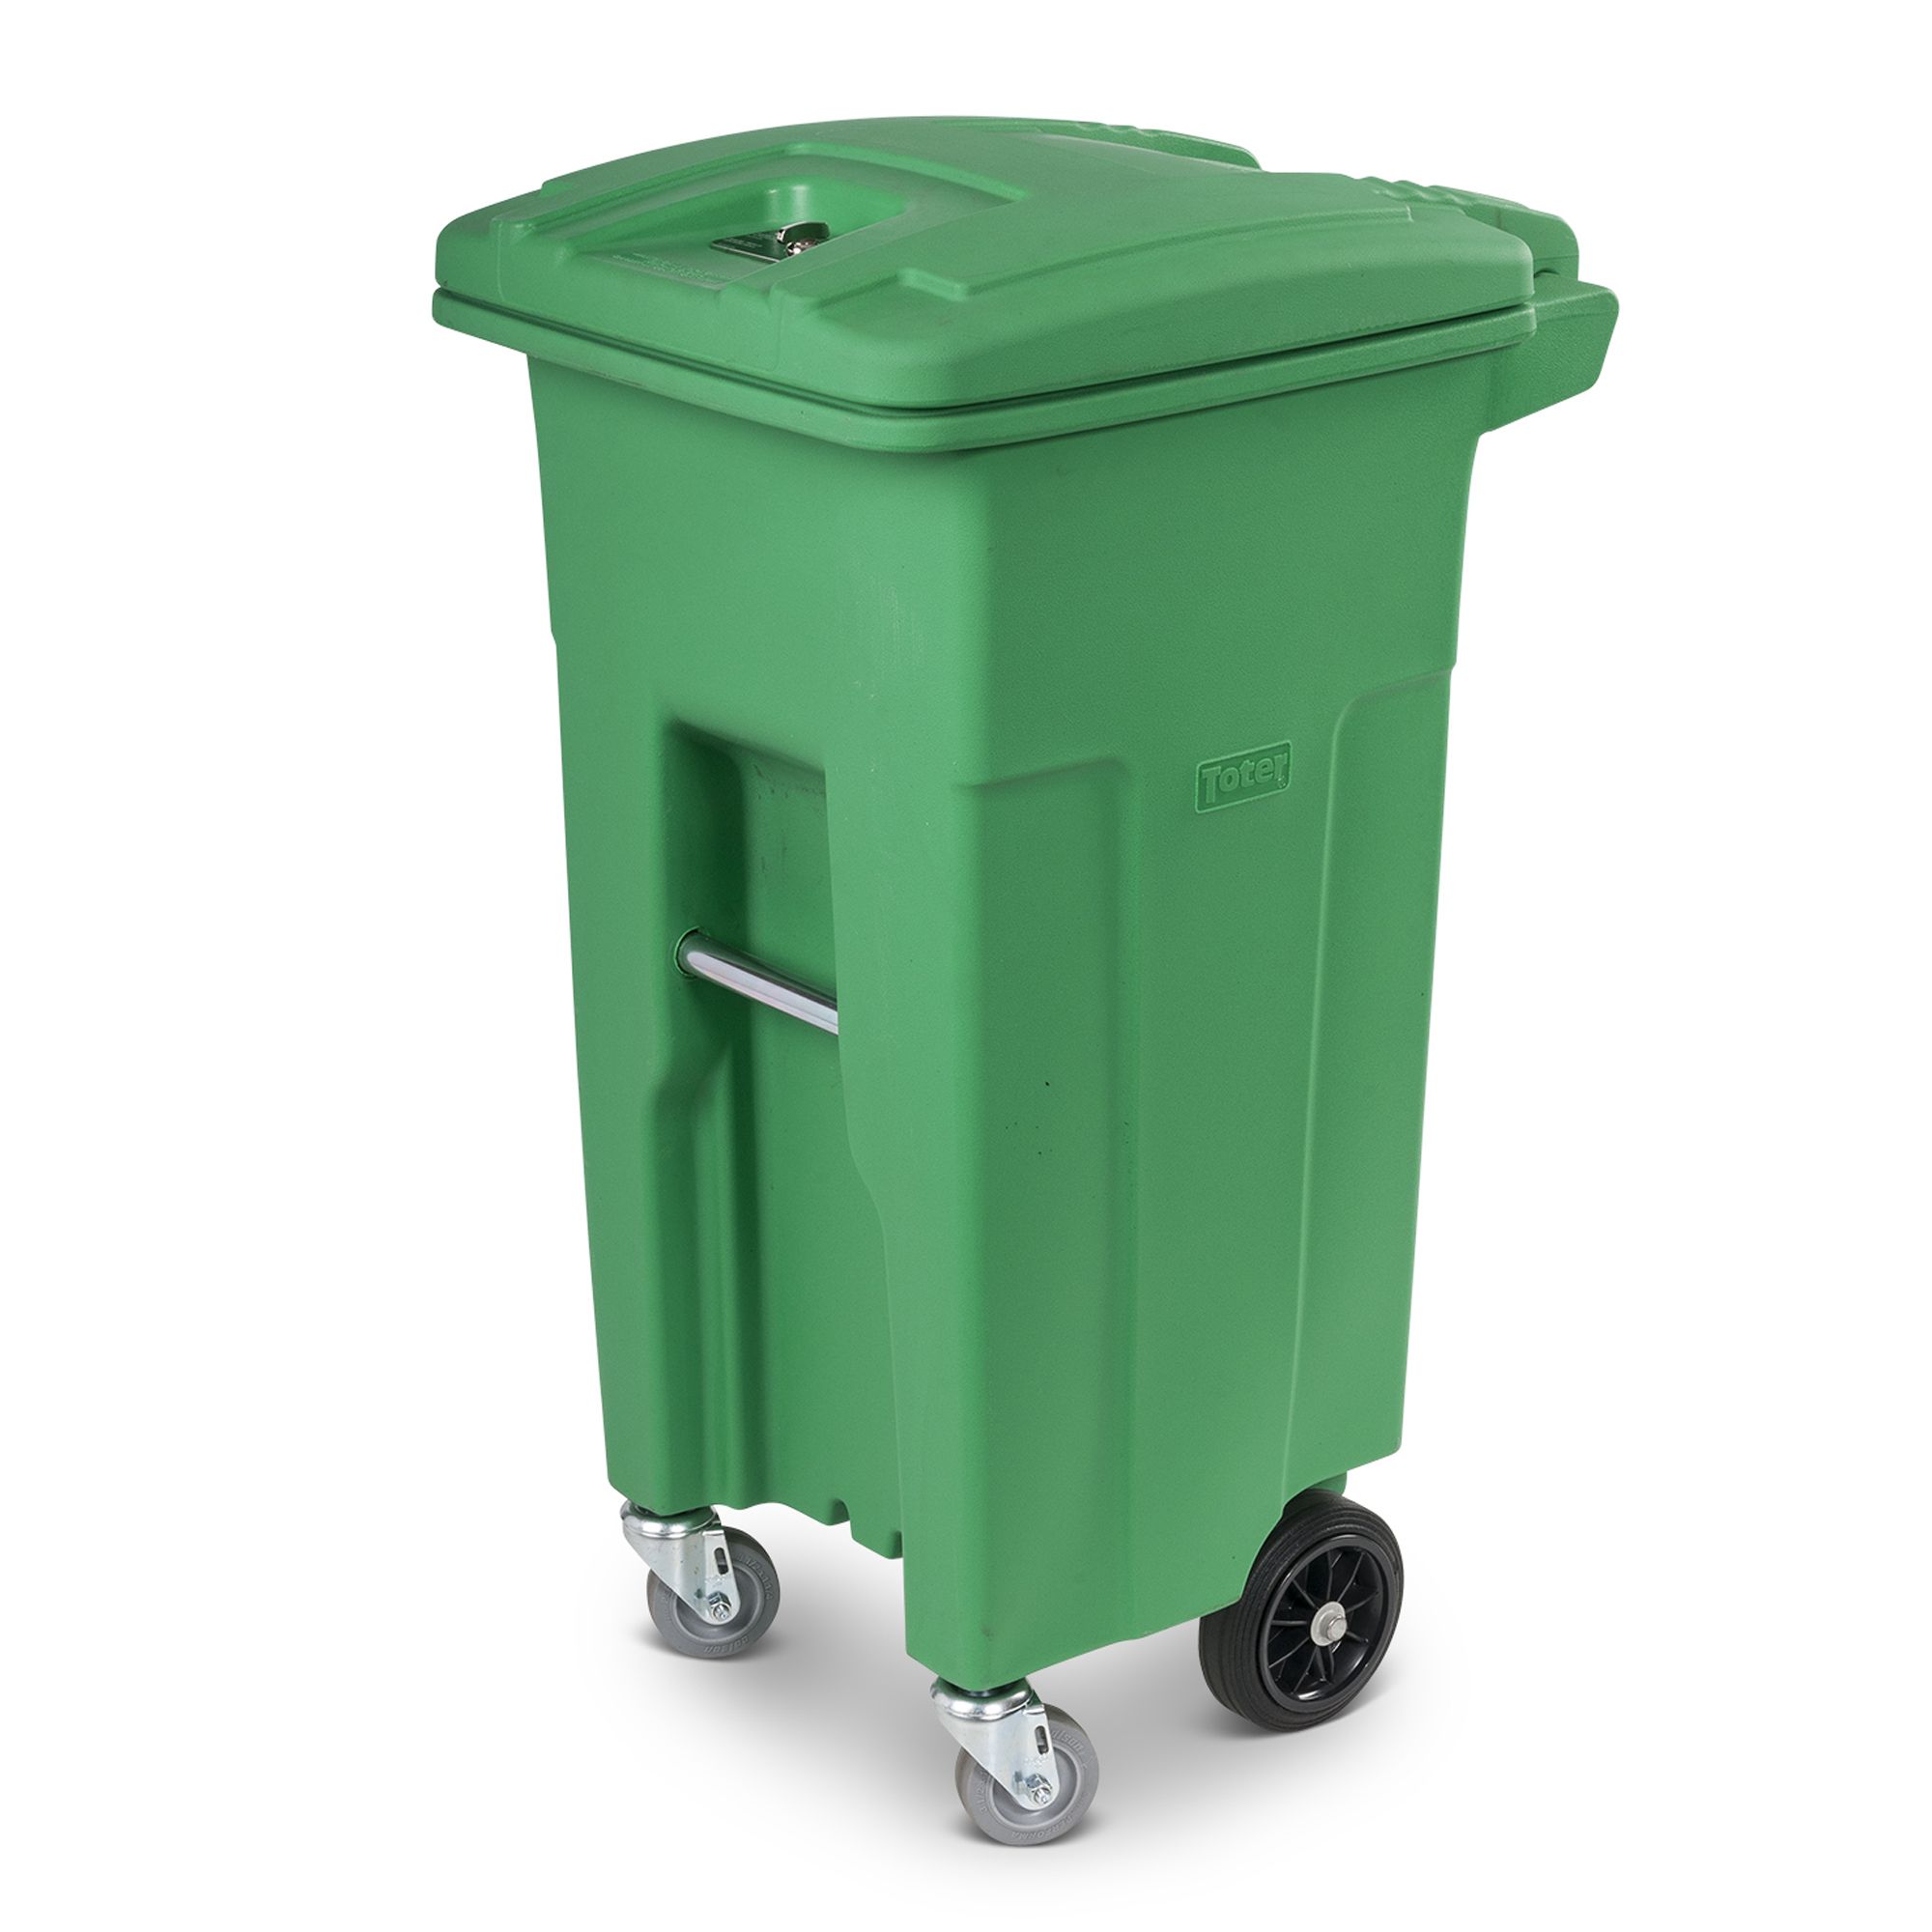 https://media.cmecorp.com/catalog/product/cache/5cb210a3a6c58f3682339fdba05c5652/T/o/Toter-32-Gallon-Lime-Green-Organics-Trash-Can-with-Wheels-and-Lid-ACG32-00LIM.jpg